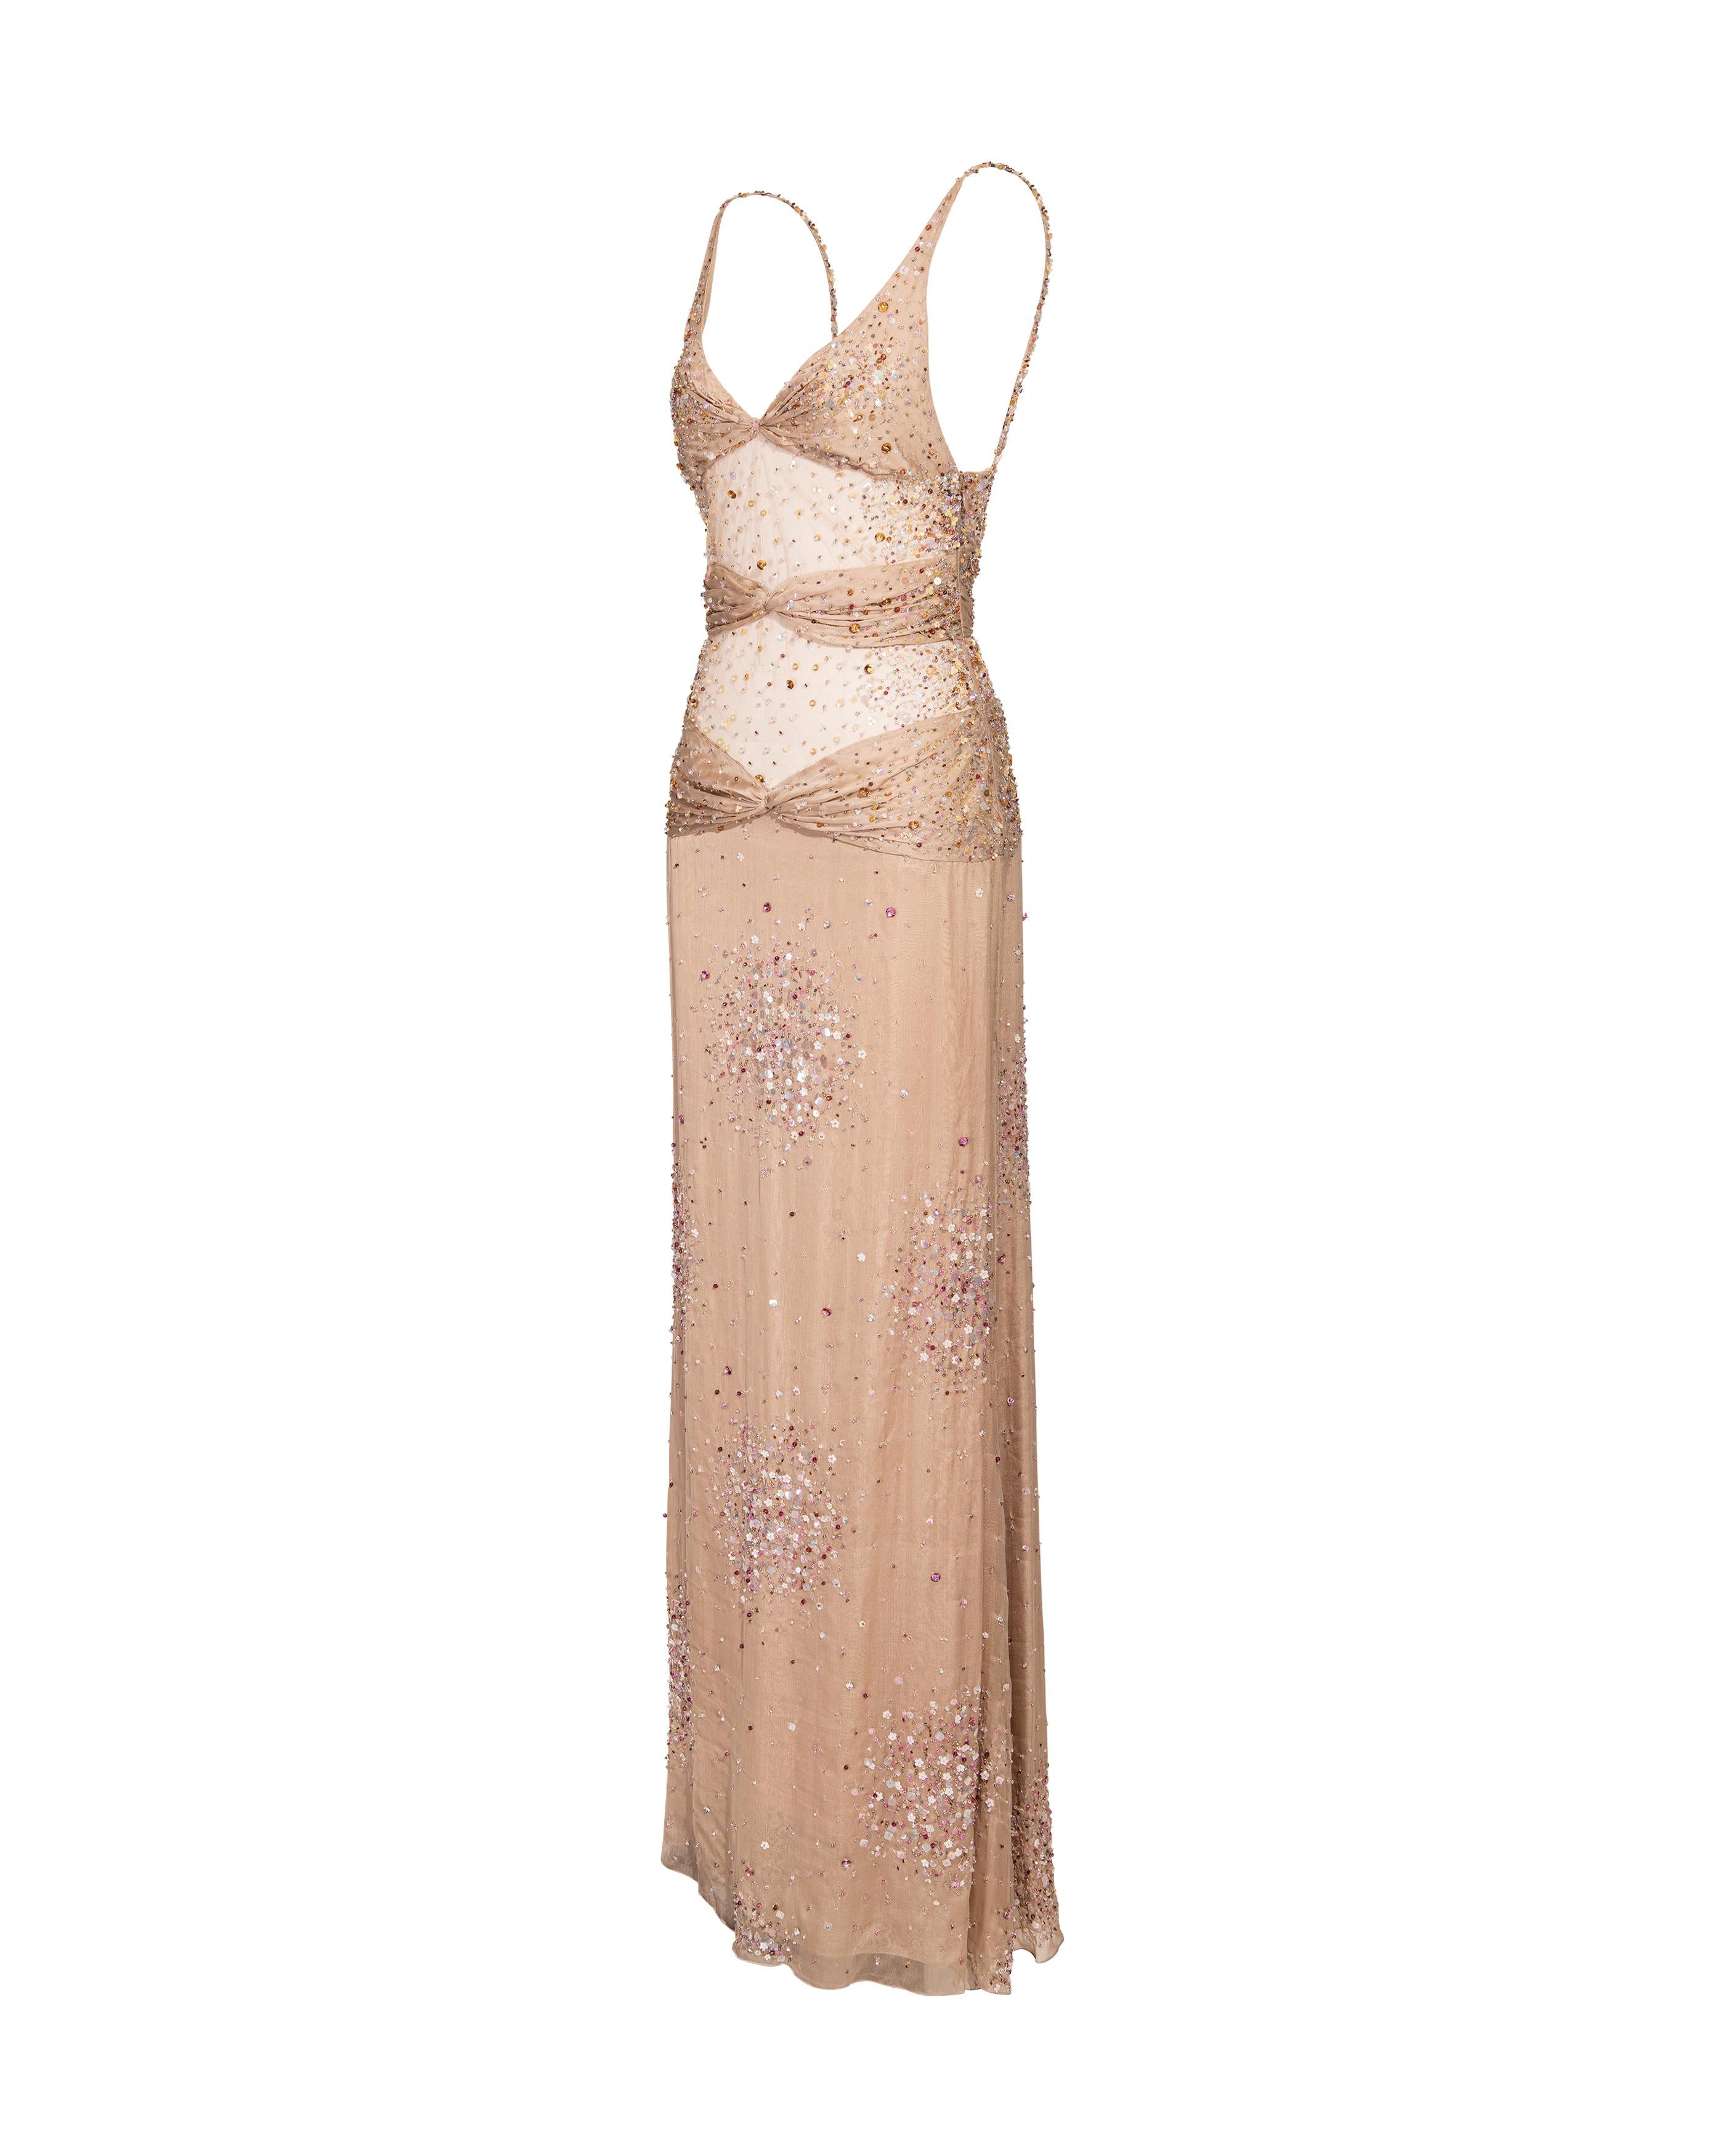 S/S 2001 Valentino Mesh and Silk Tan Embellished Gown In Excellent Condition In North Hollywood, CA